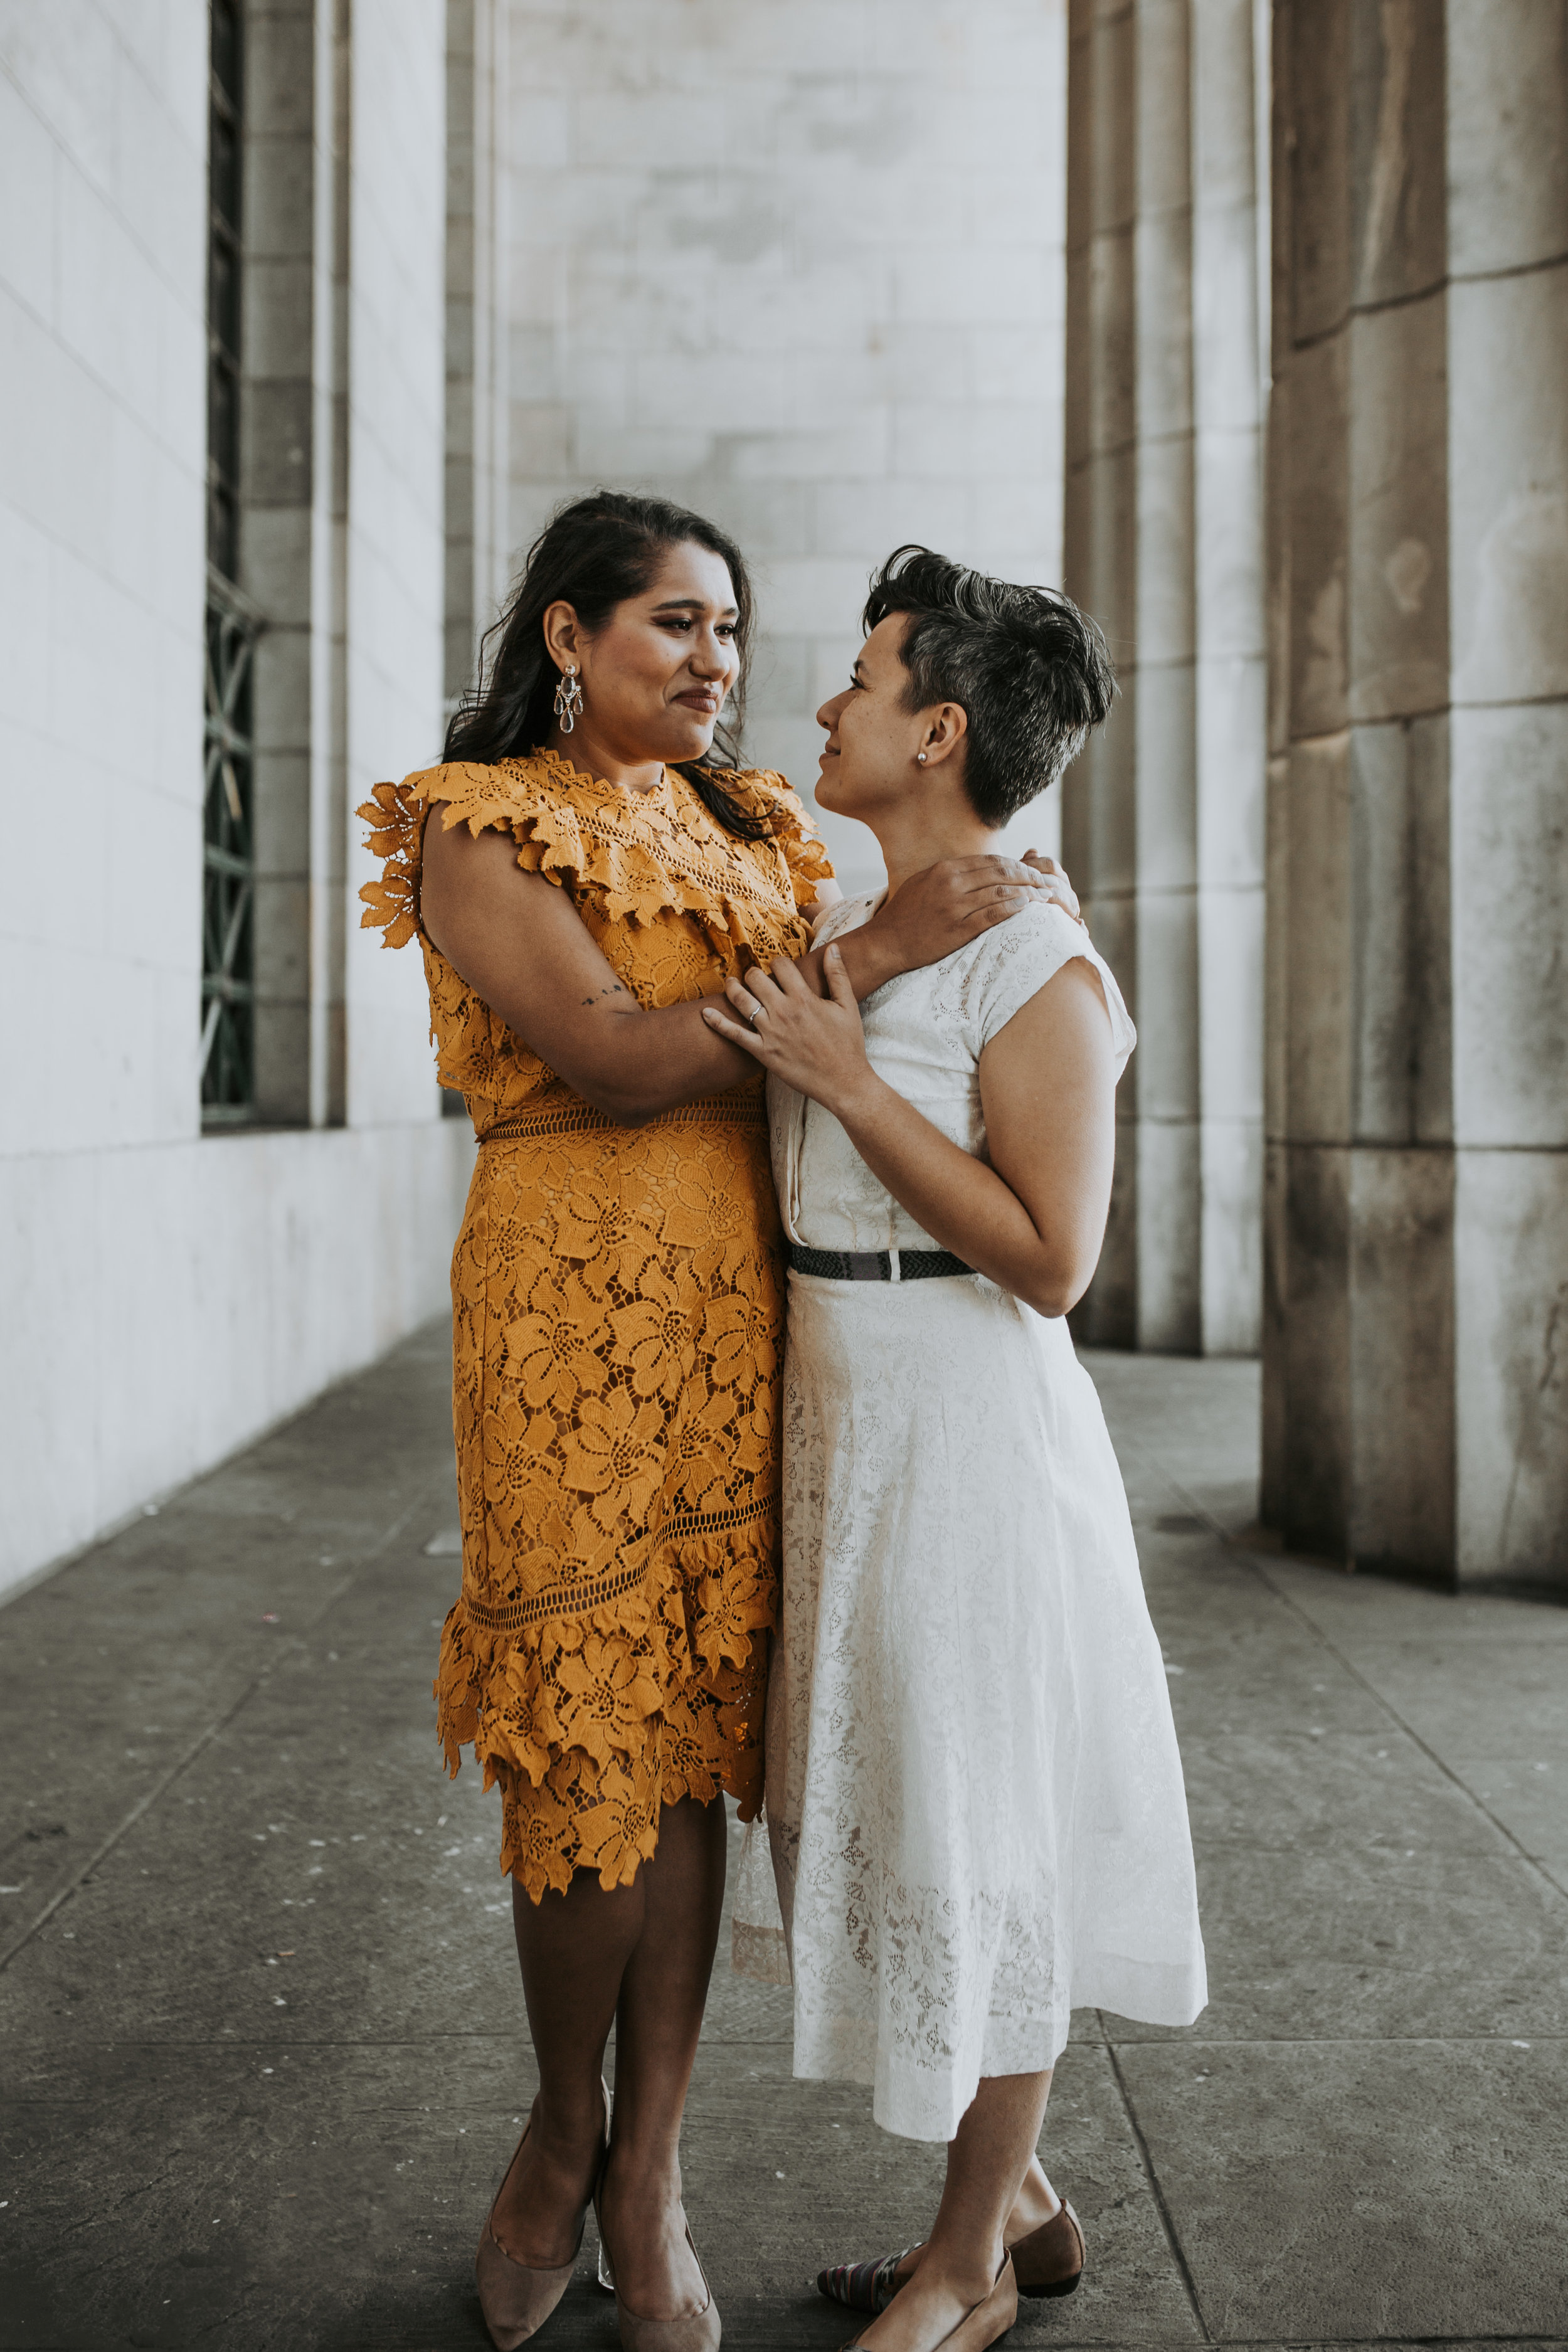 Shannen&Nadia_Buenos Aires_19June2019_(c)FeliciaLimPhotography_22.jpg